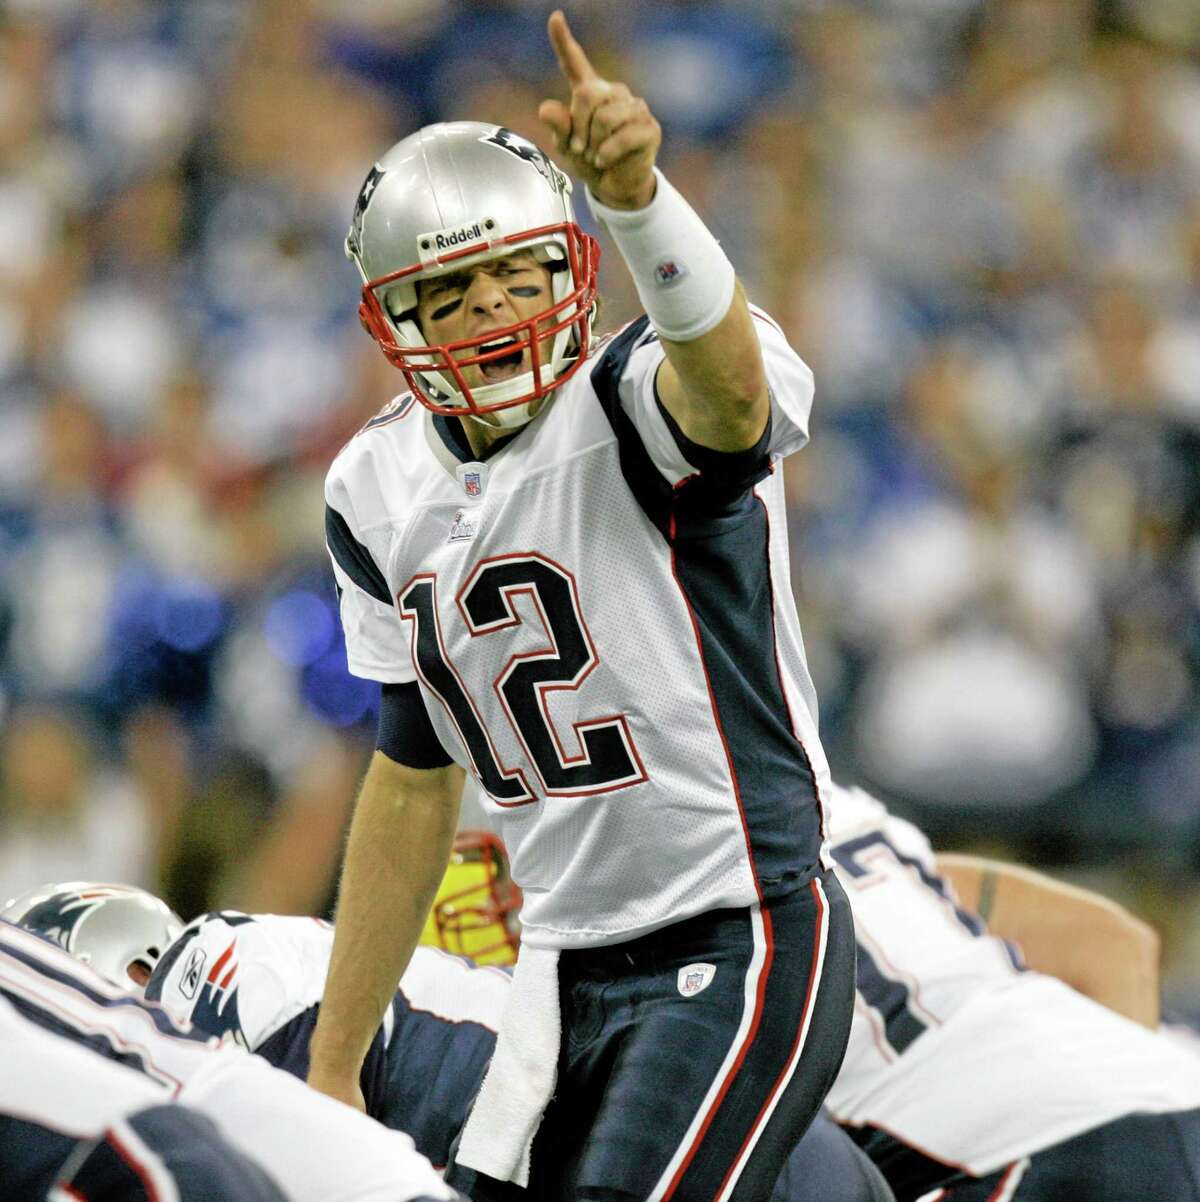 Tom Brady and the Patriots will try to bounce back from their first loss of the season Sunday against the Saints.